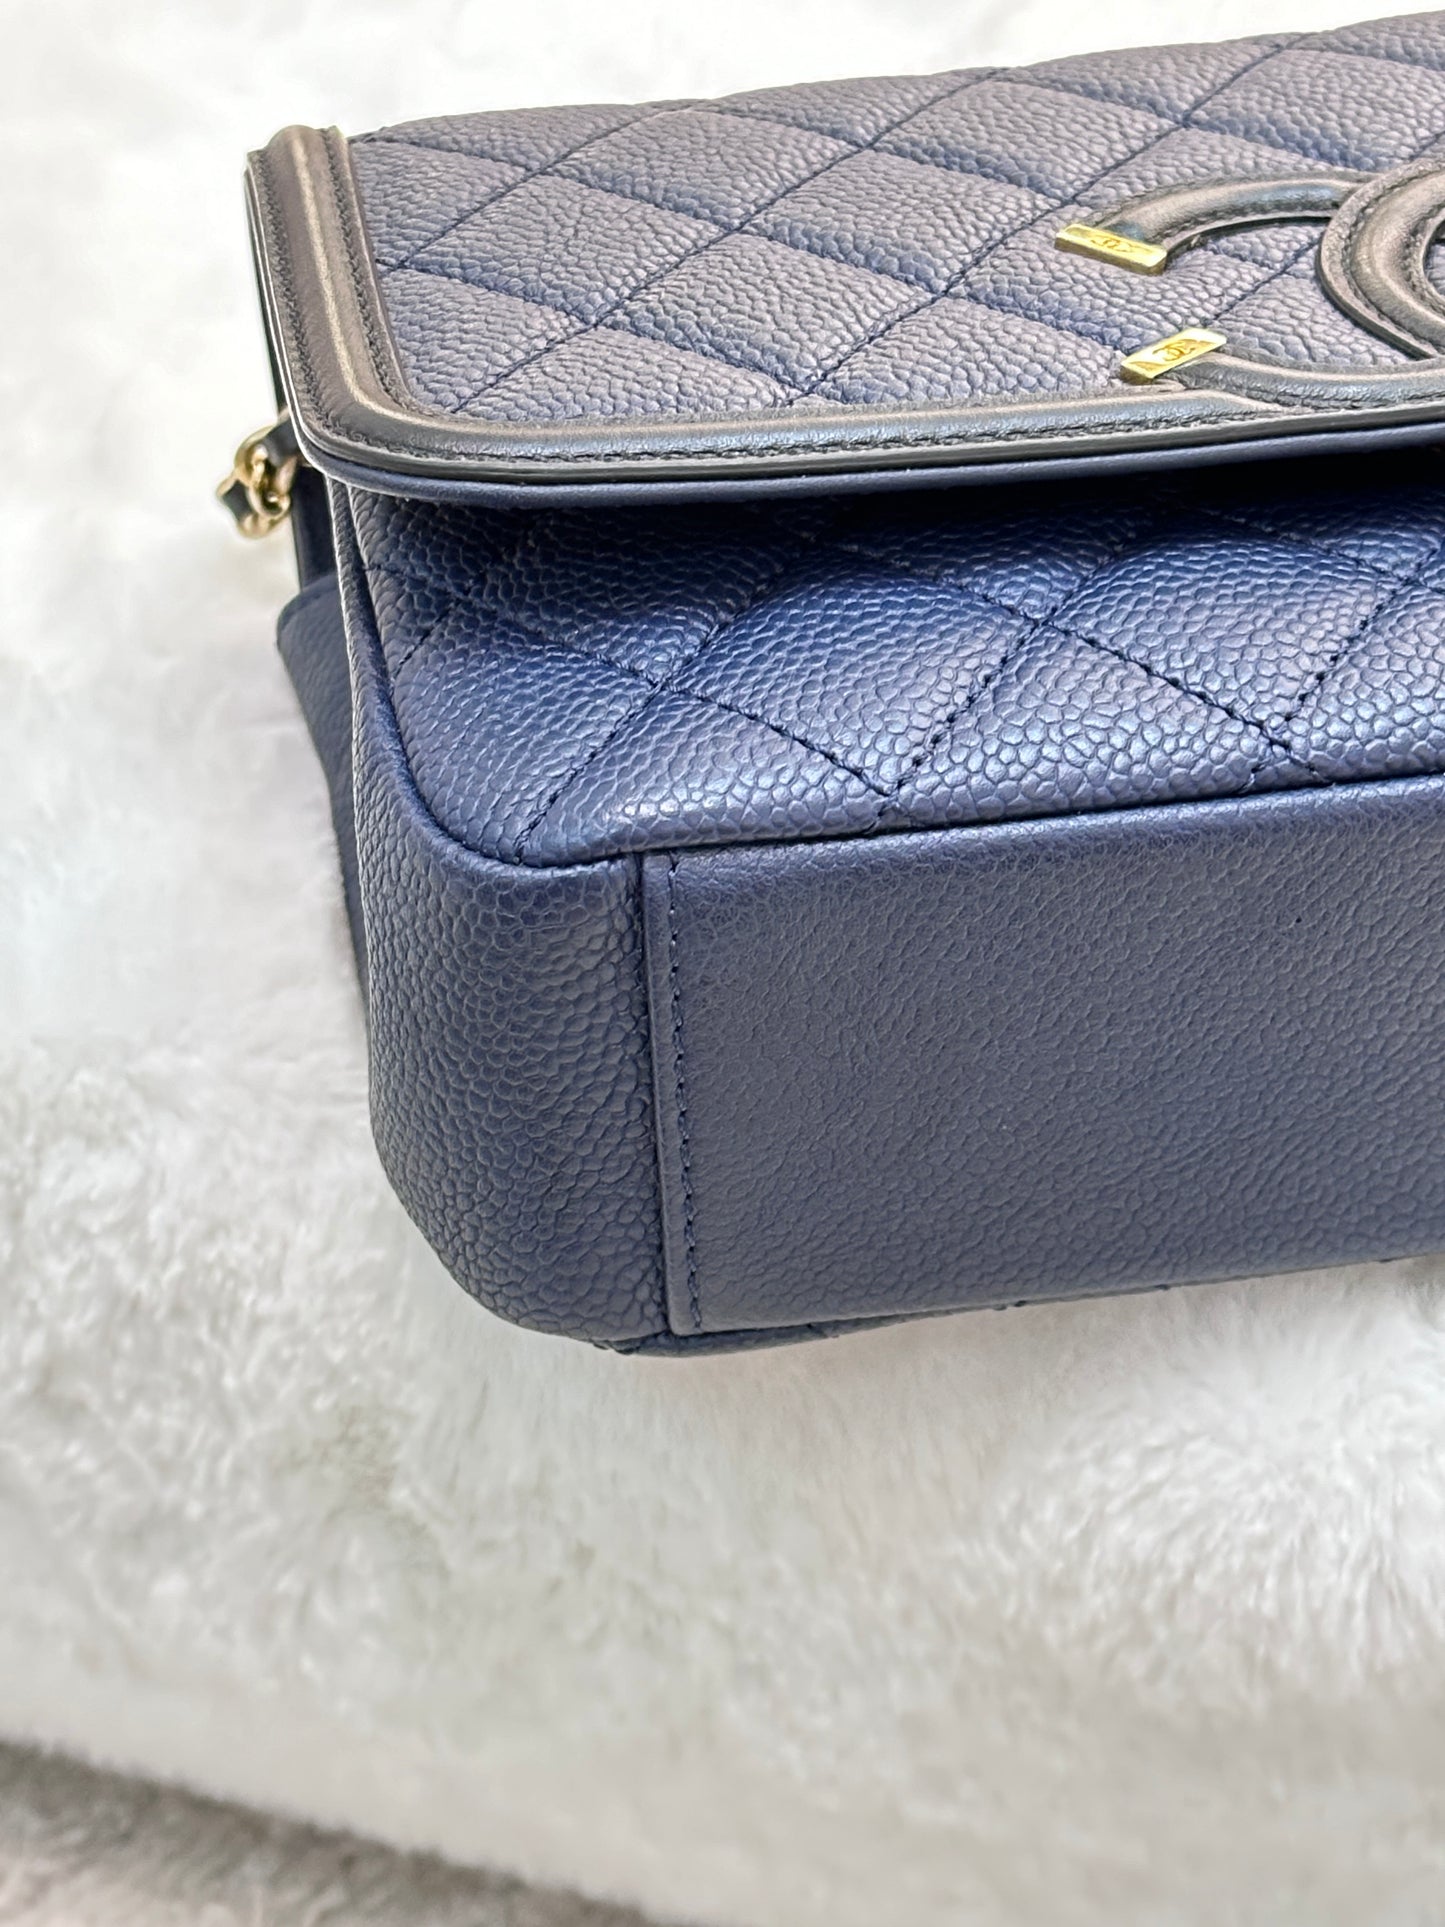 Chanel Caviar Quilted Small CC Filigree Flap Navy Black